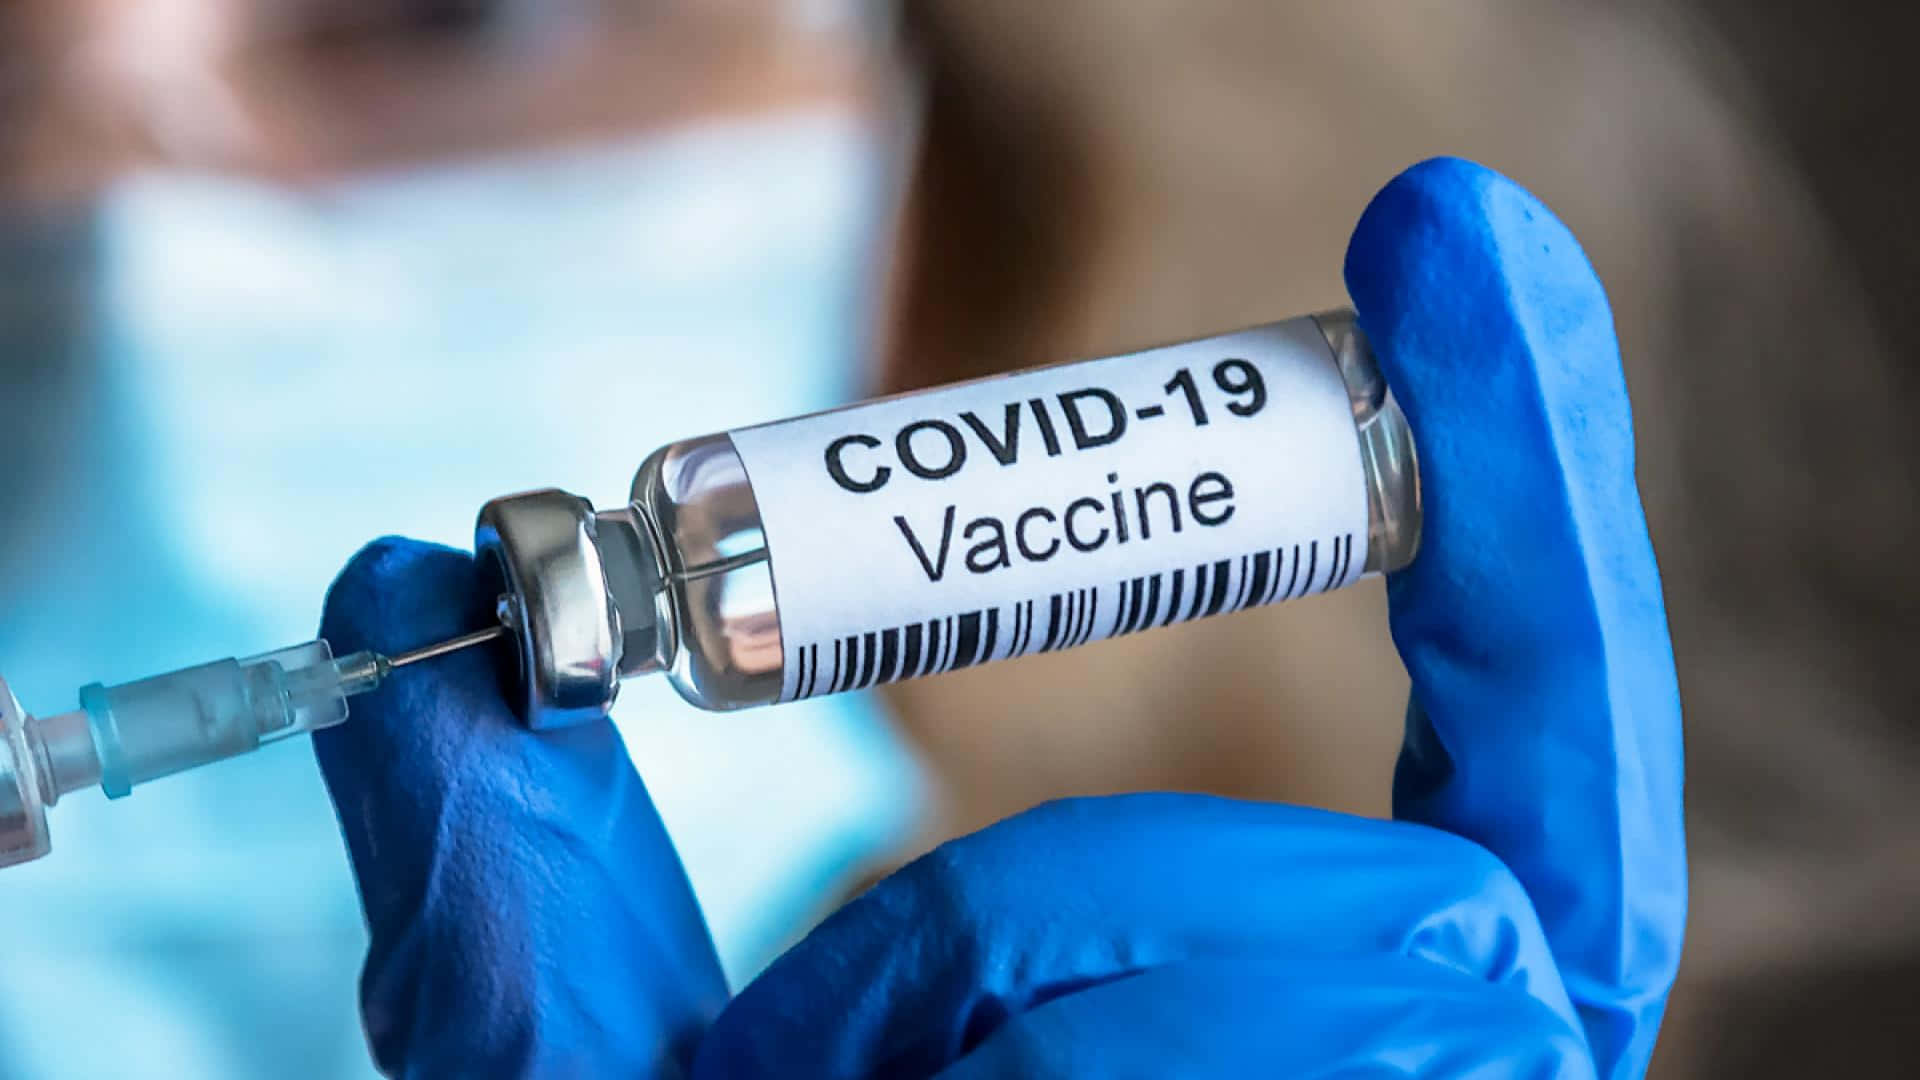 Female Doctor Holding Covid-19 Vaccine